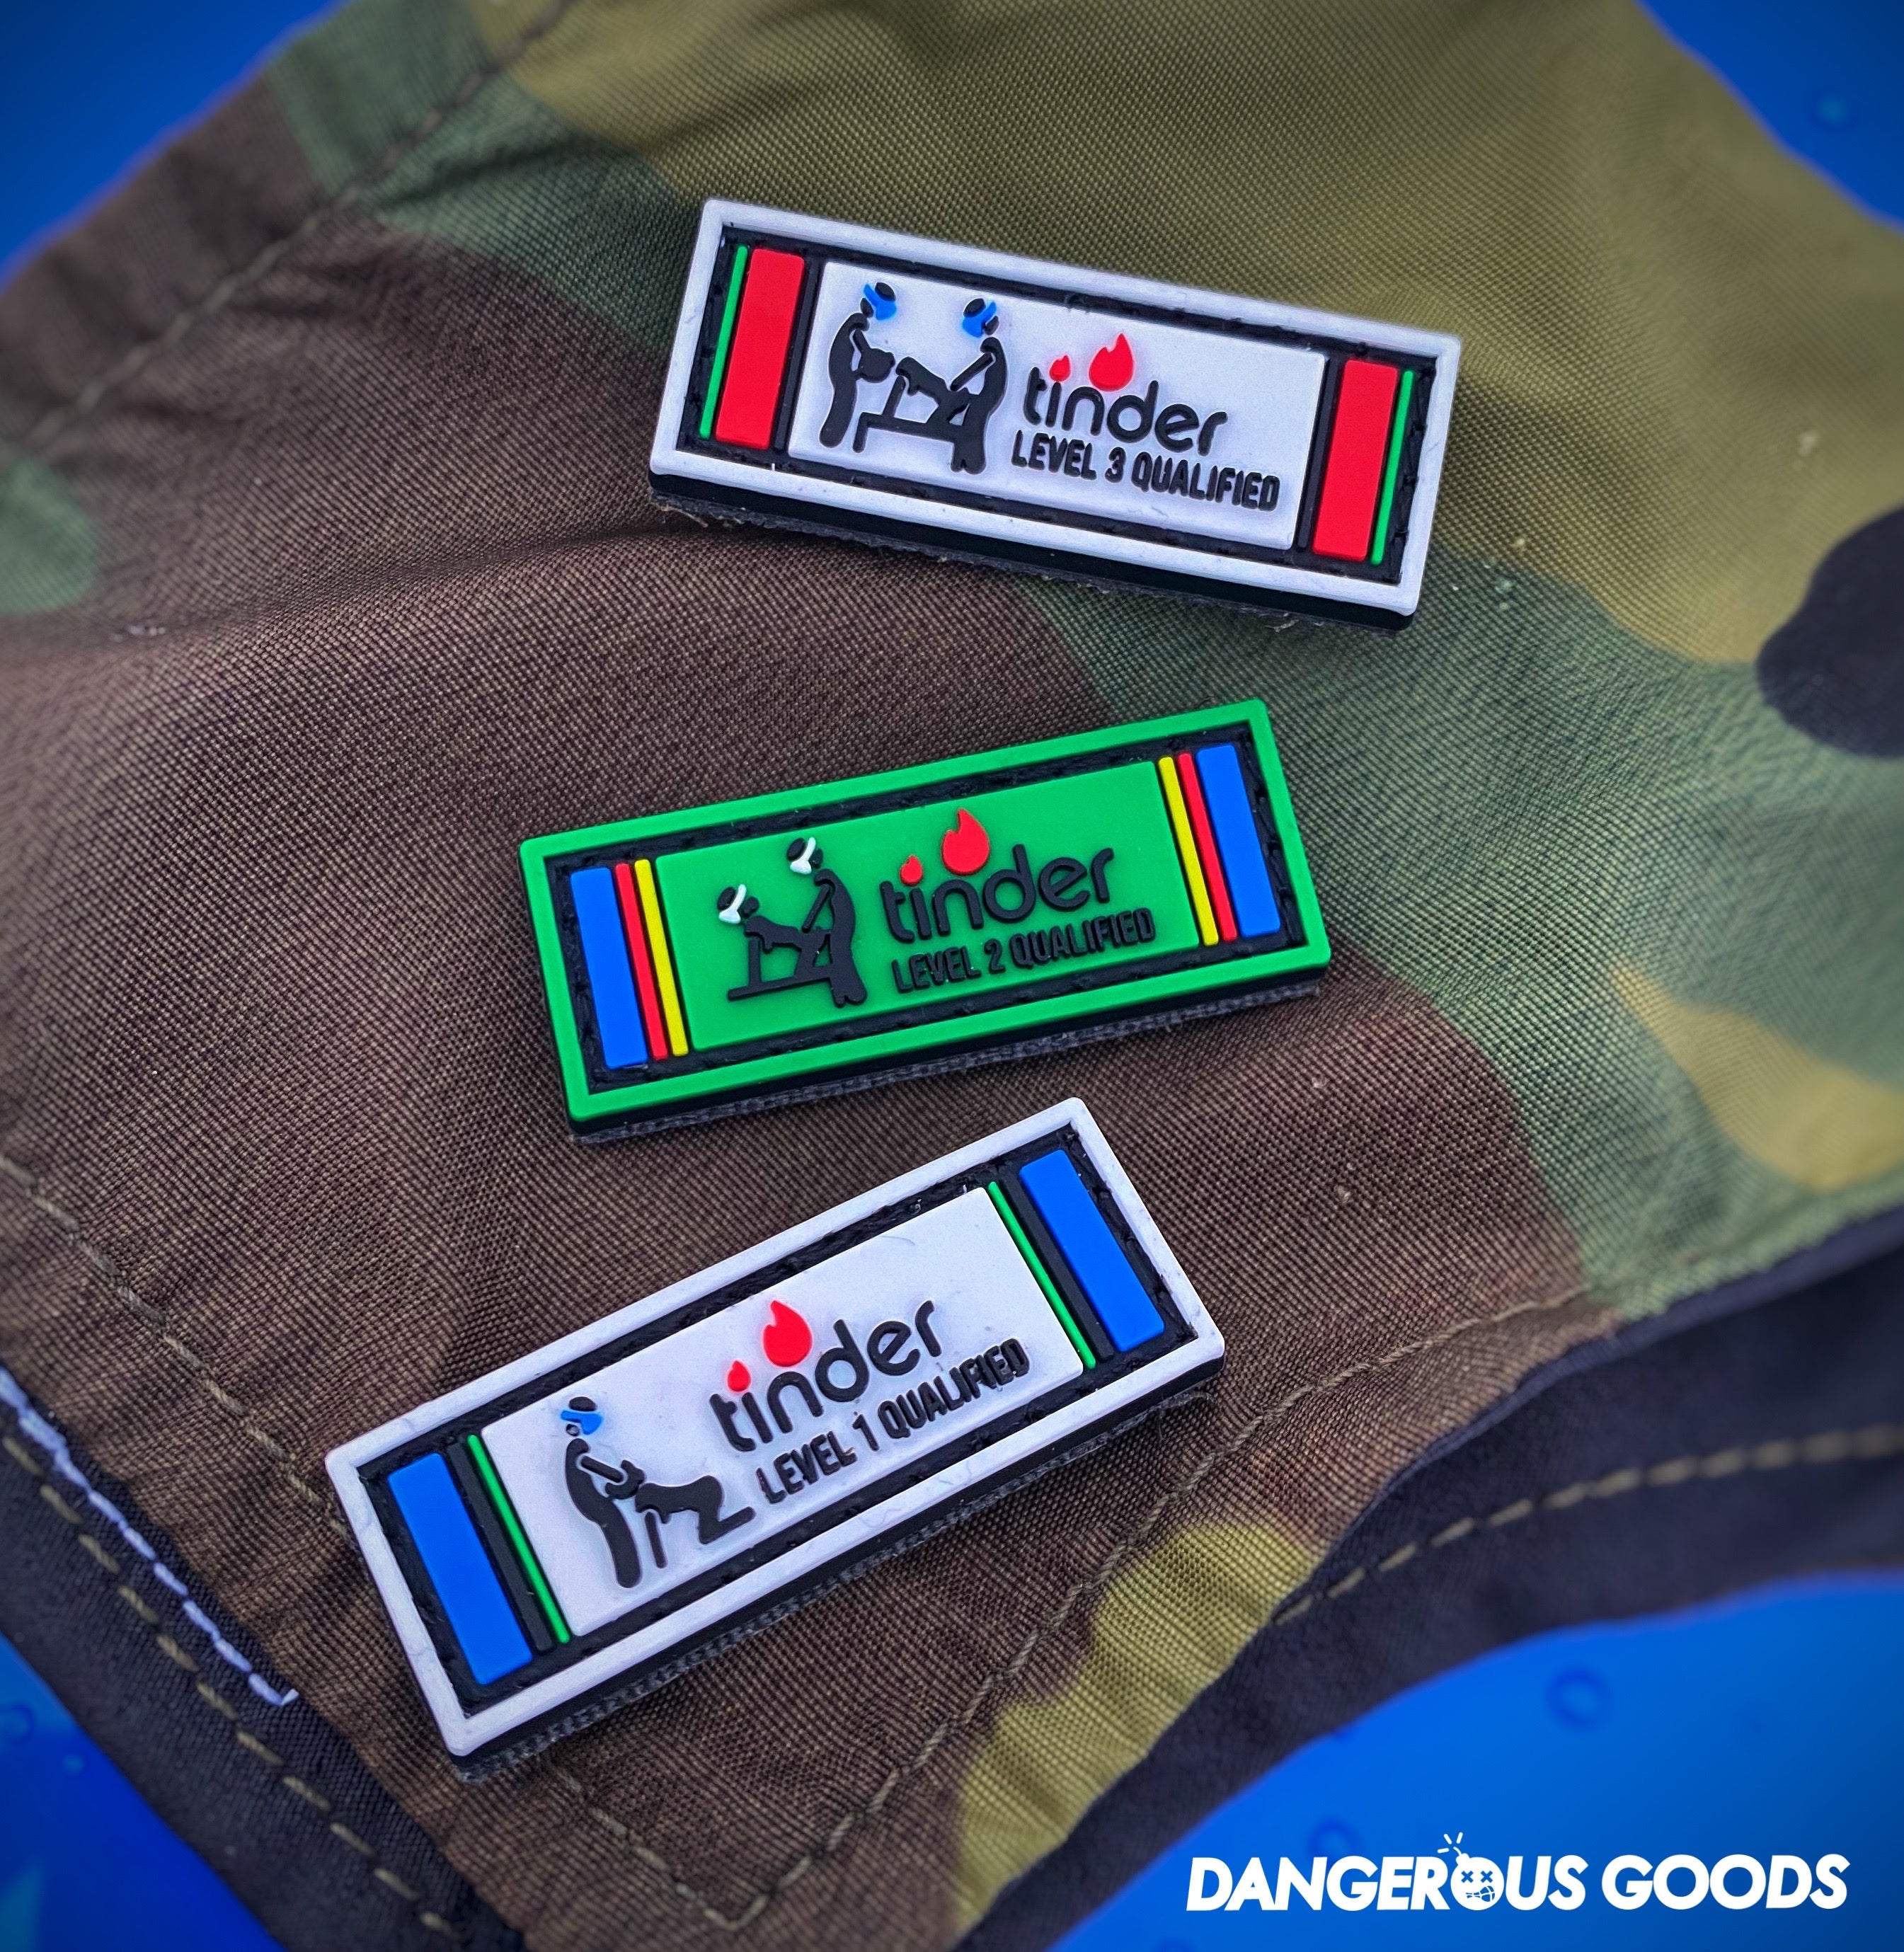 Dangerous Goods® Tinder Qualified PVC Military Ribbon Morale Patch - 3 Options